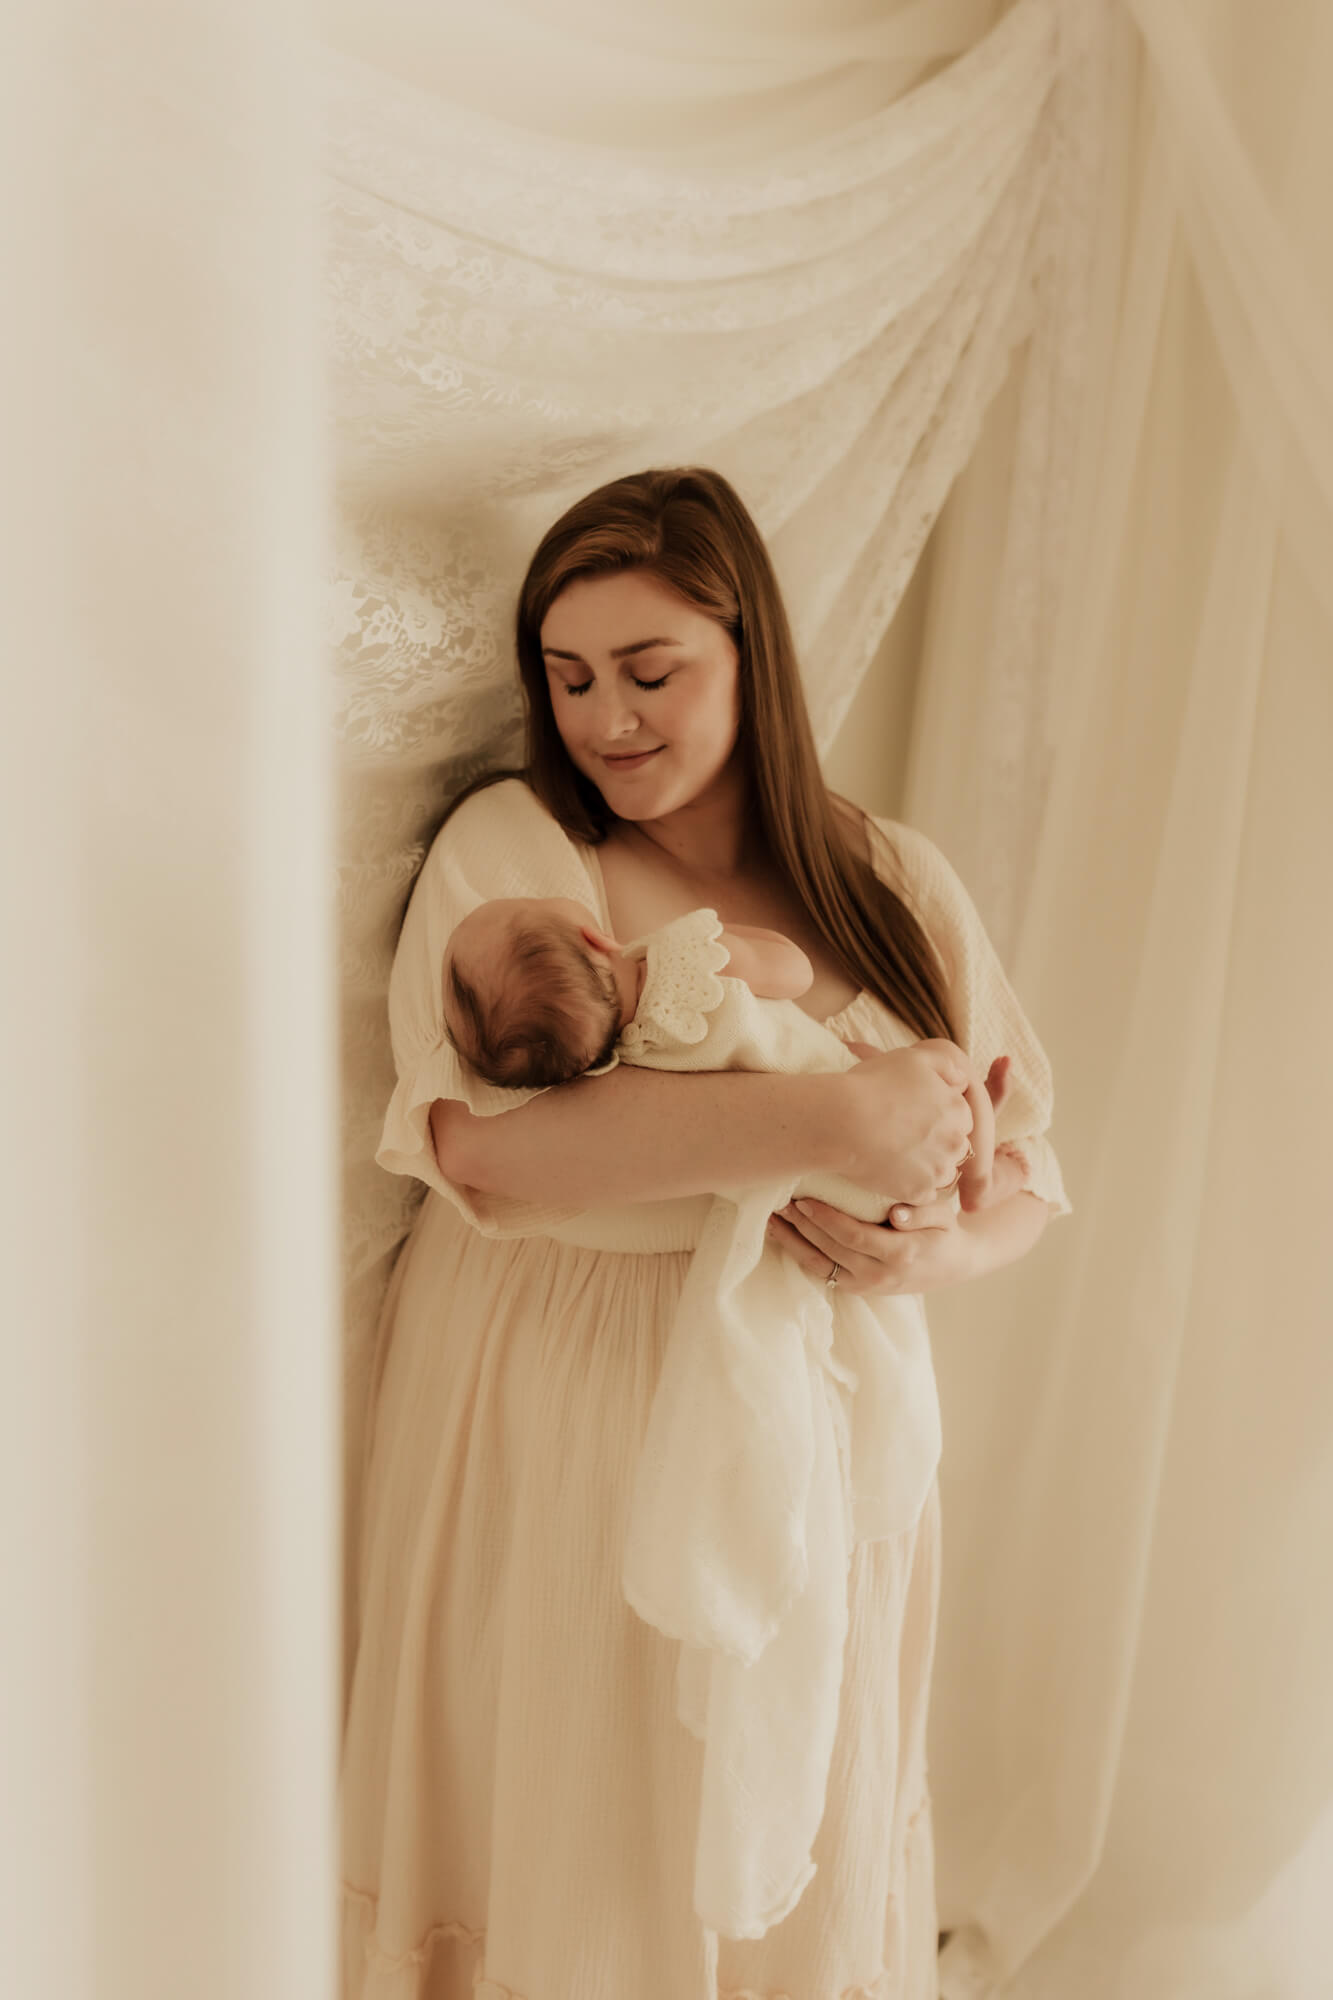 A new mother stands under some drapes looking down at the newborn baby in her arms lactation consultant okc